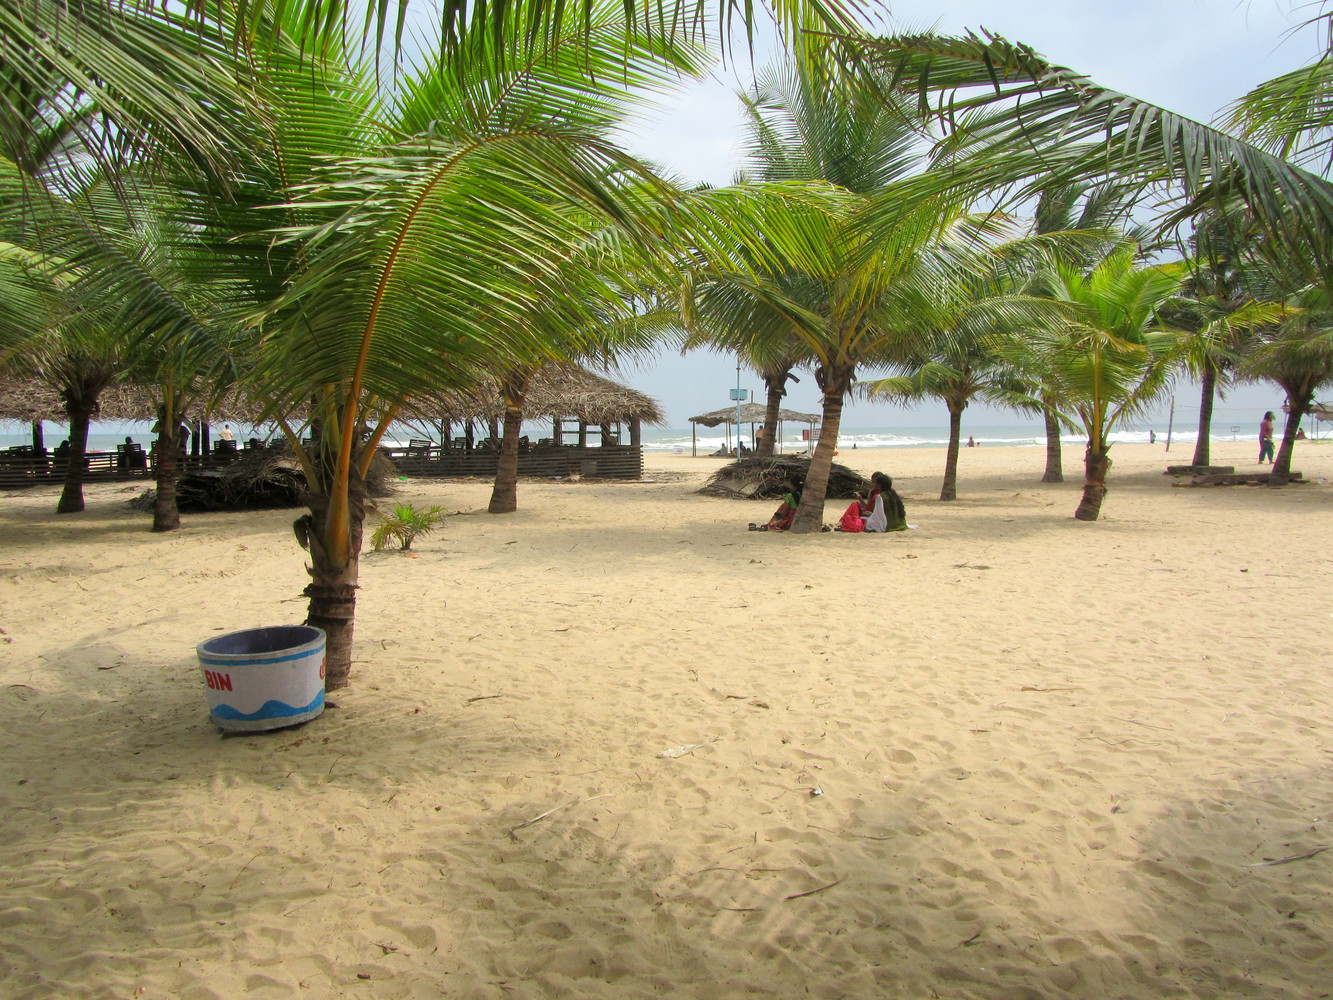 Palm trees on beach, thatched shelters behind the trees, and the sea behind the shelters